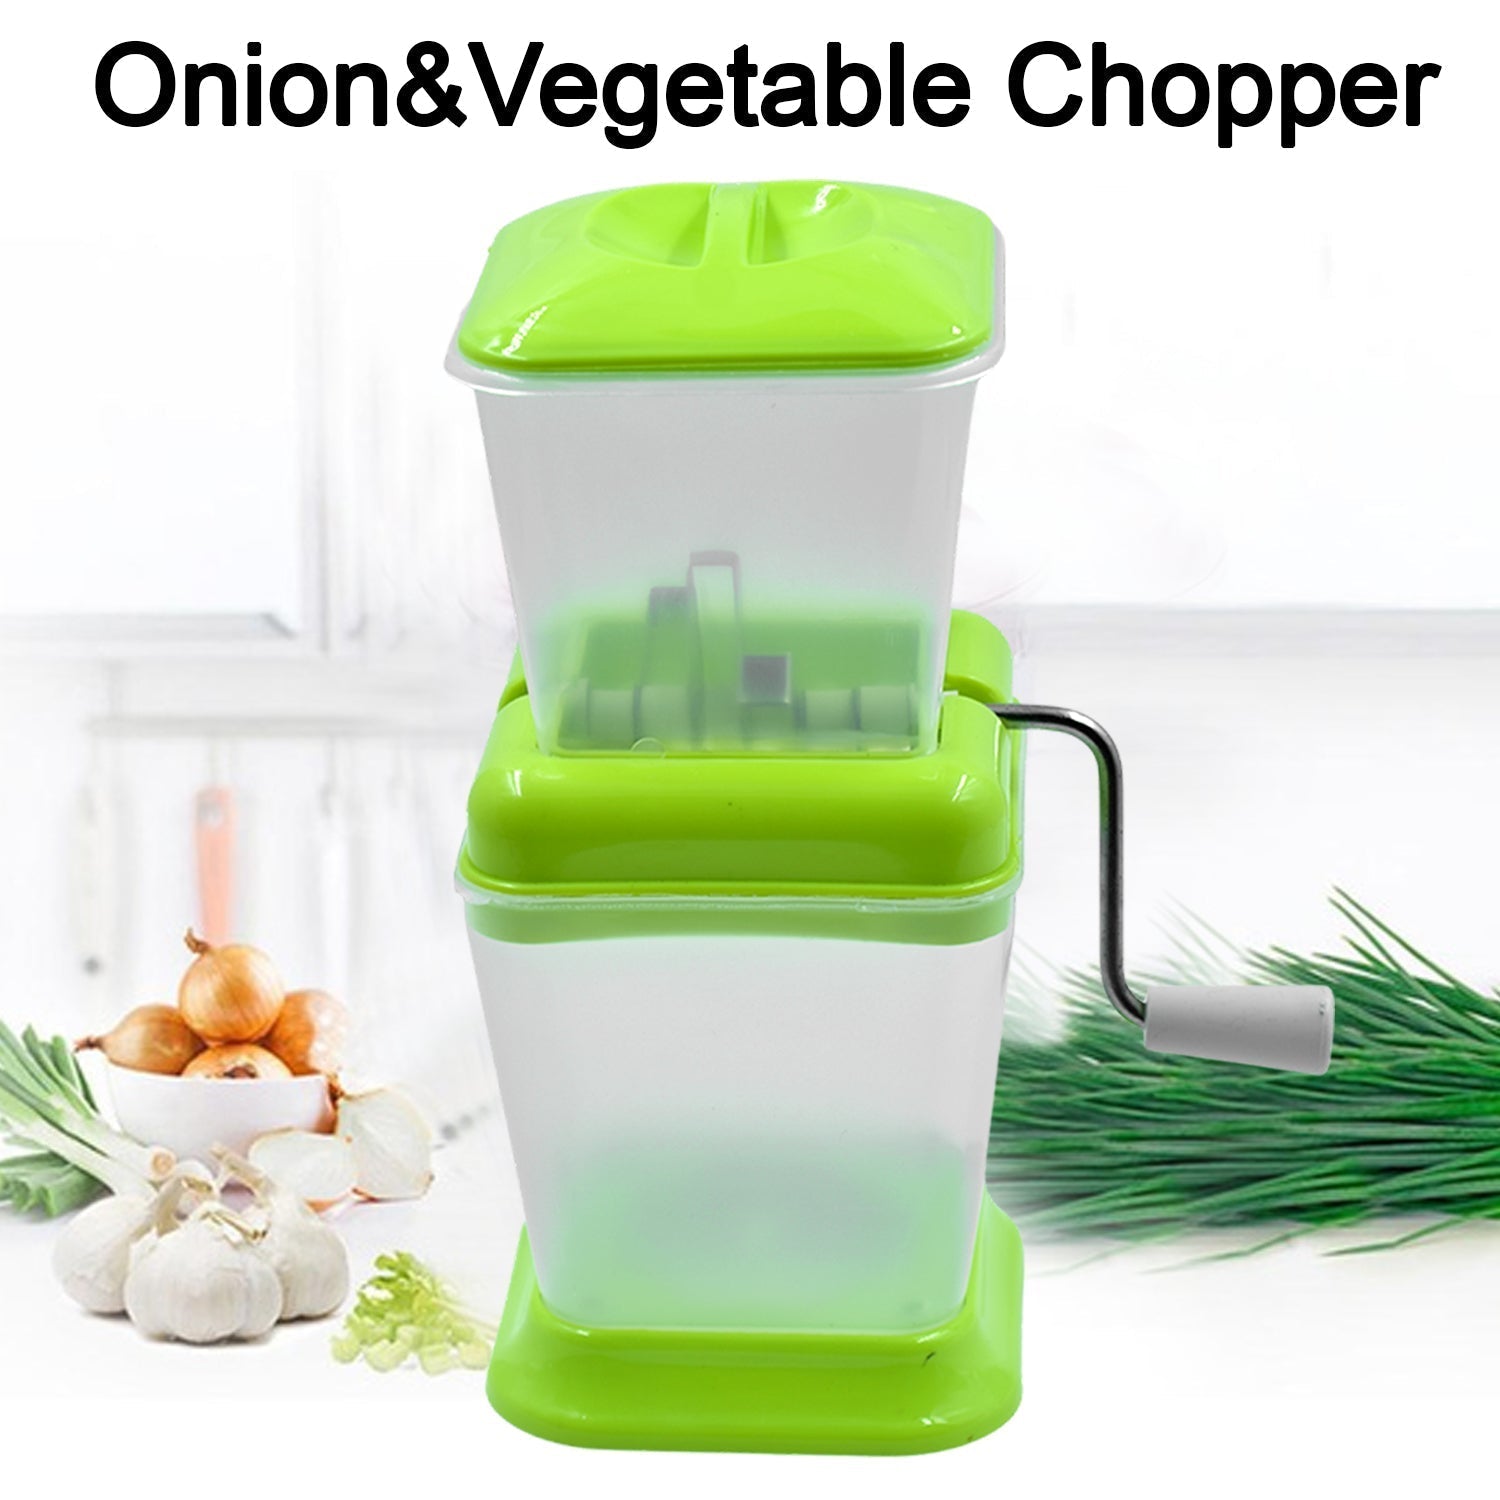 2003 Small Onion Chopper & Vegetable Chopper Quick Cutter with Rotating Blade 